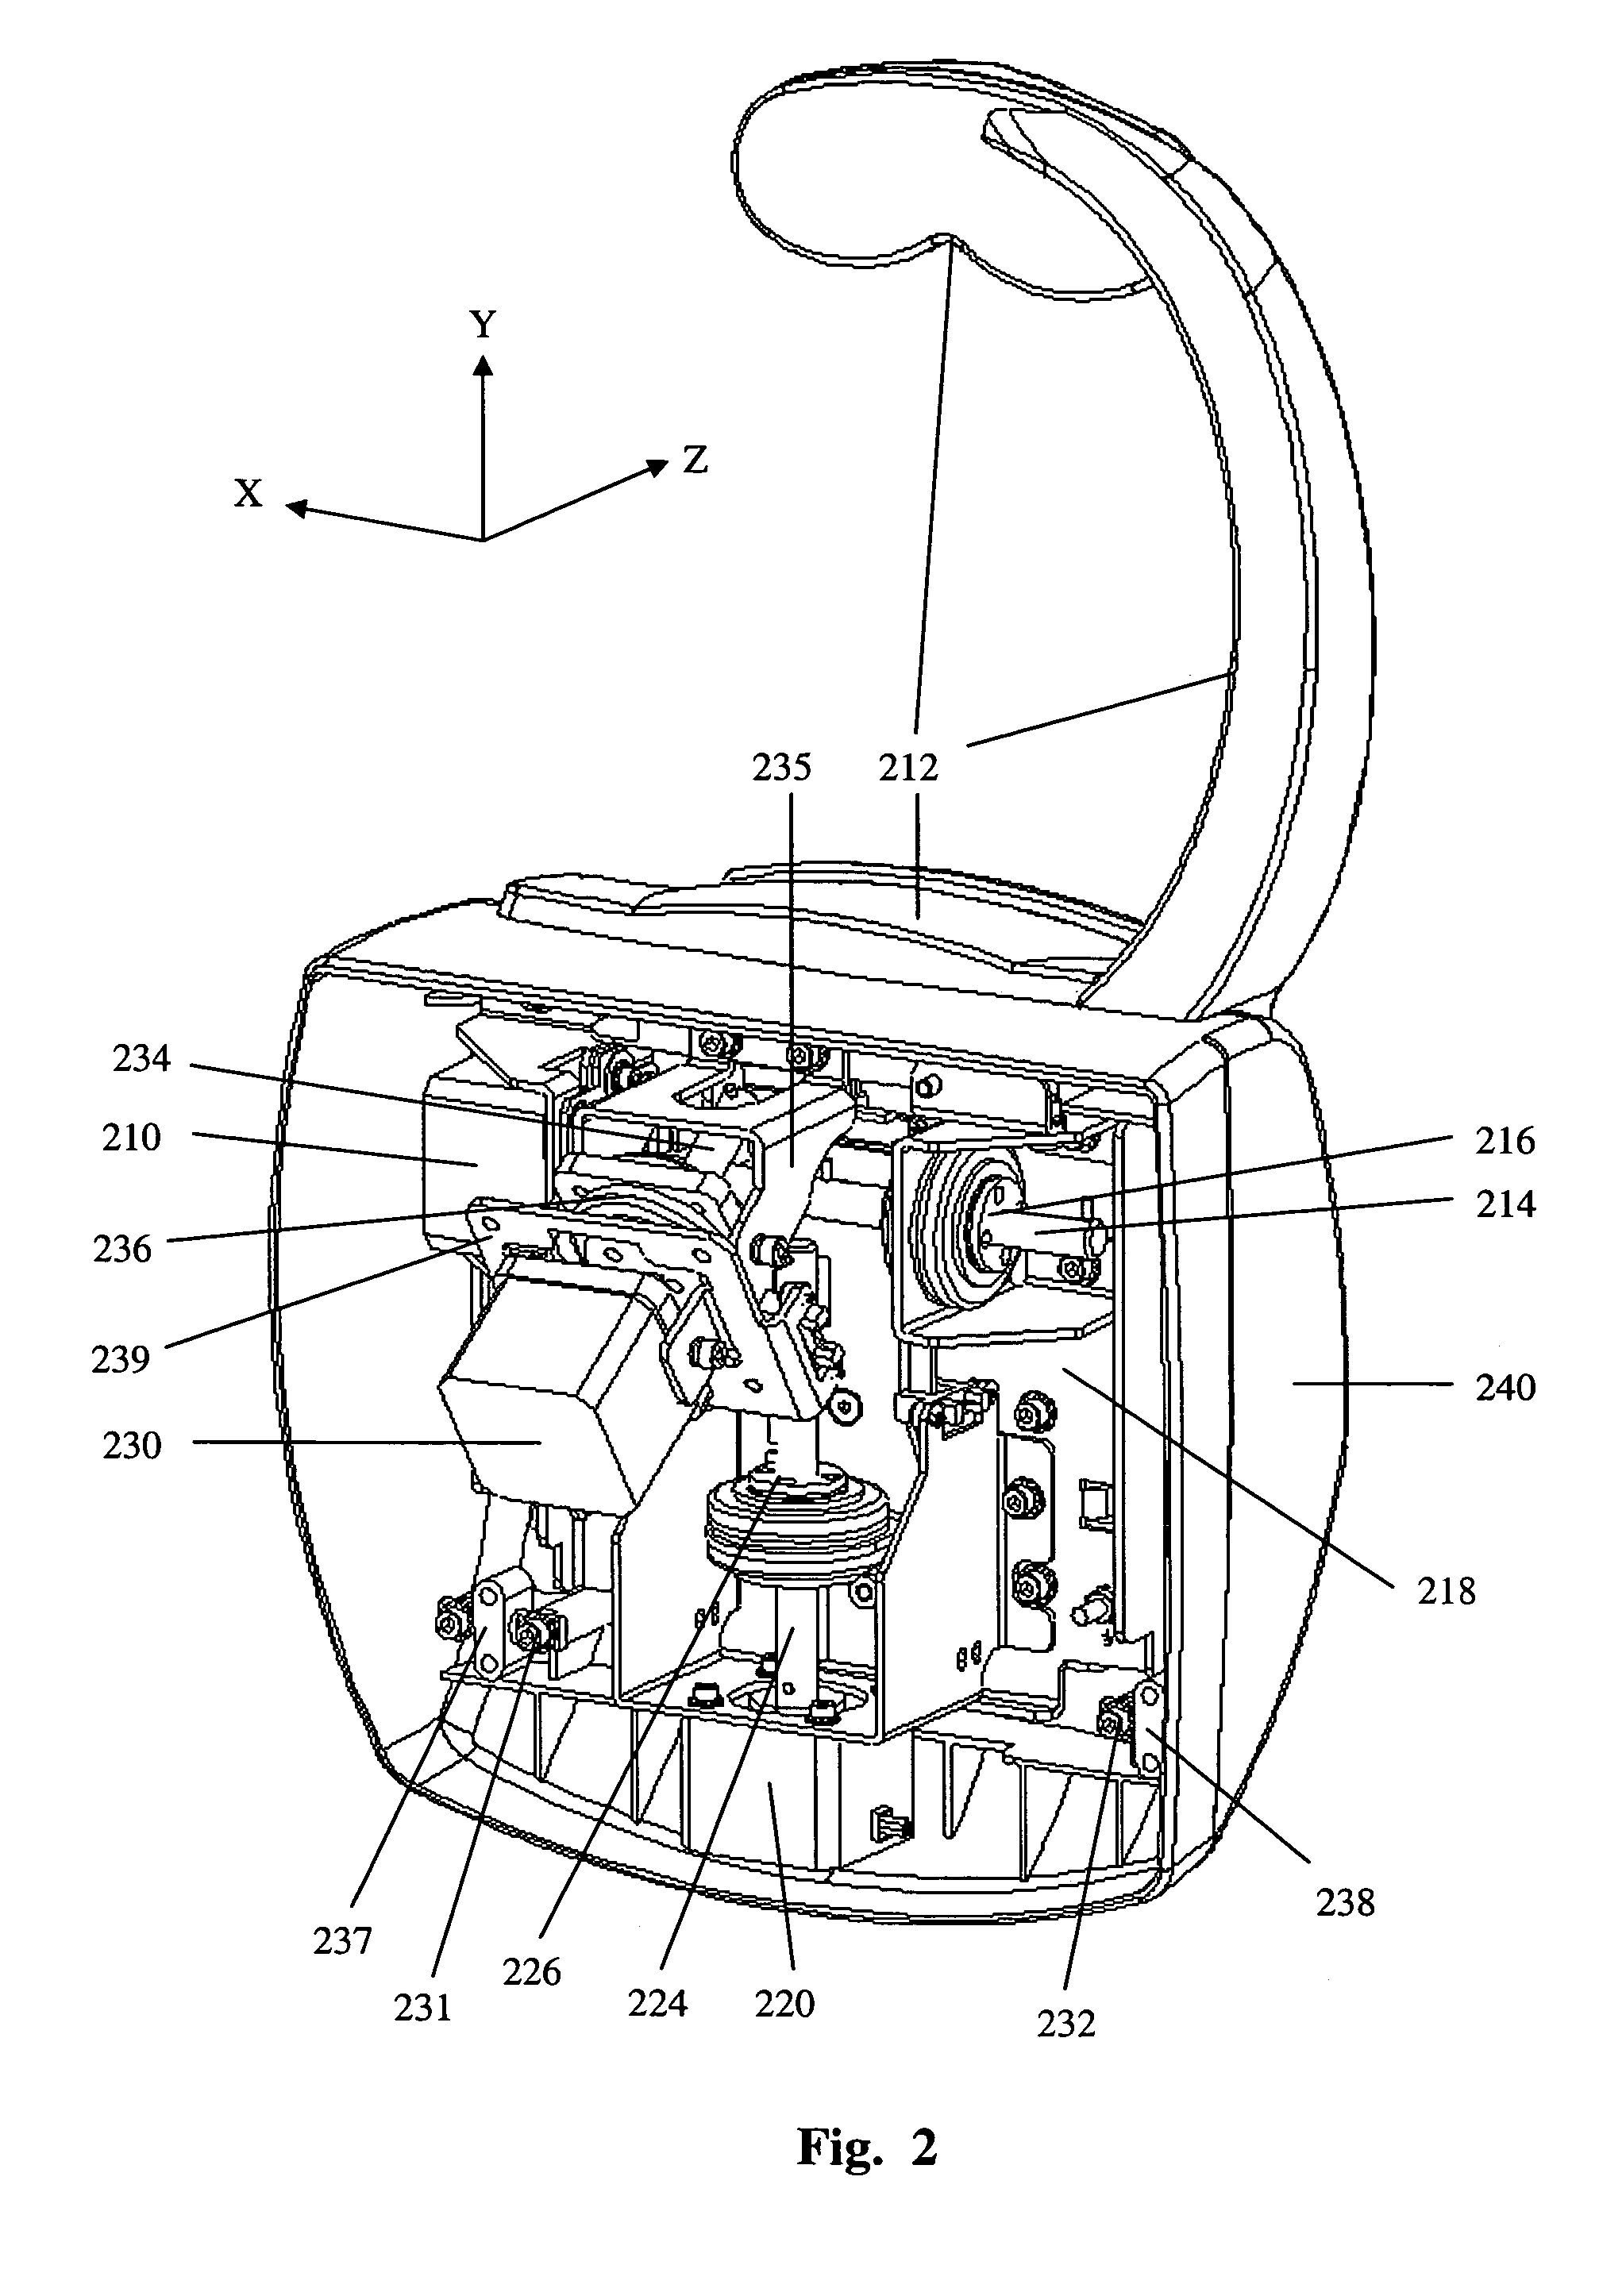 Motorized patient support for eye examination or treatment